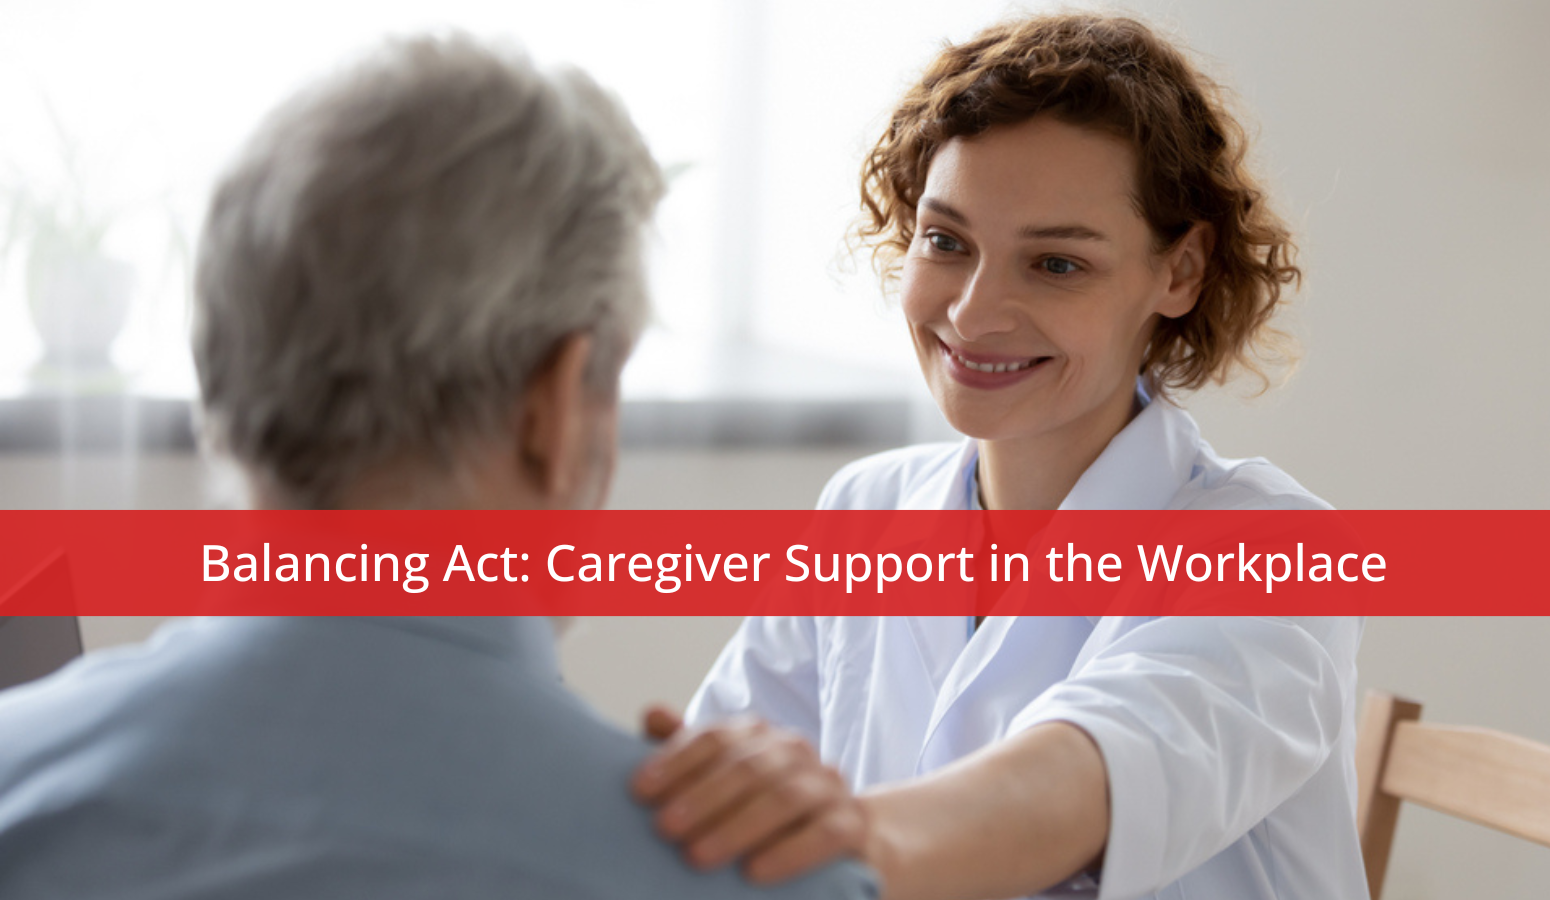 Featured image for “Balancing Act: Caregiver Support in the Workplace”